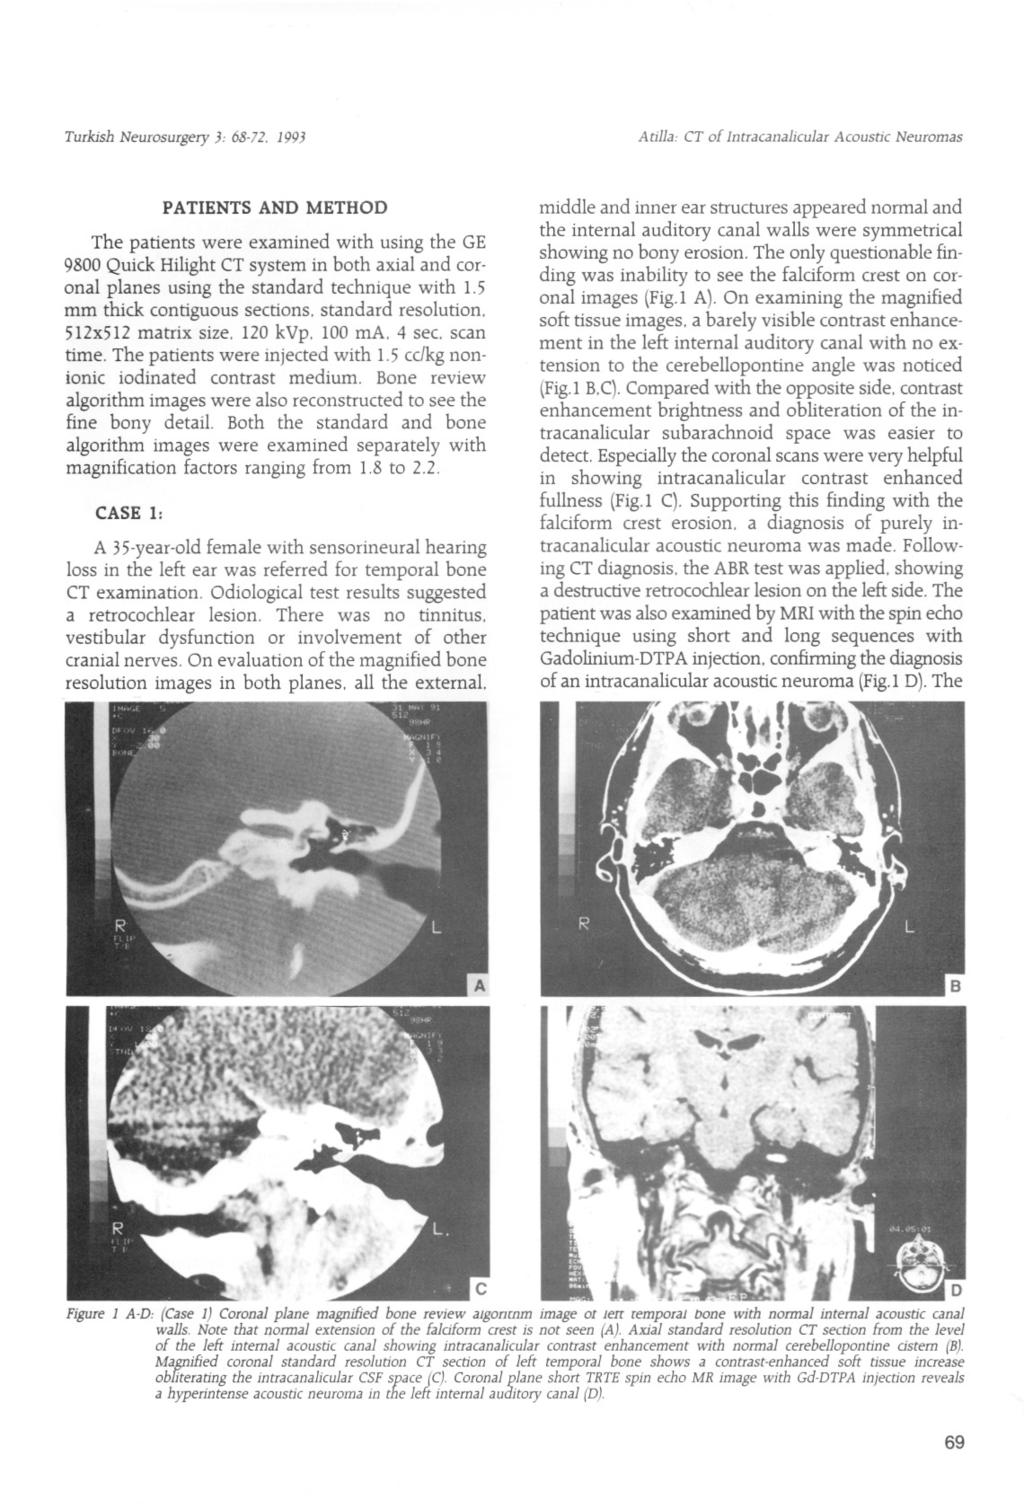 Atilla: CT of 1ntracanaJicuJarAcoustic Neurornas CASE 1: PATIENTS AND METHOD The patients were examined with using the GE 9800 Quick Hilight CT system in both axial and coronal planes using the